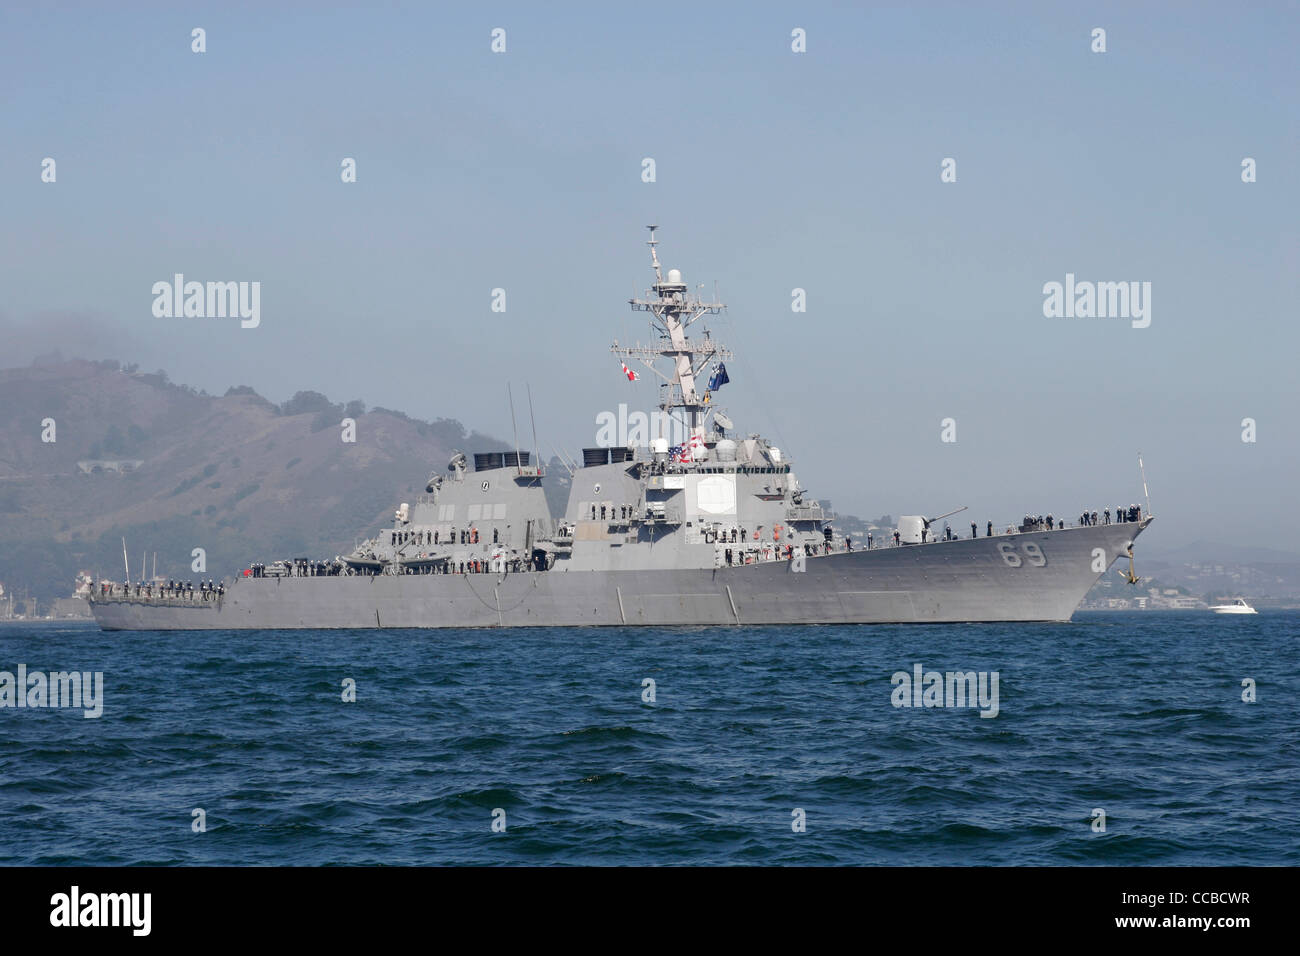 Arleigh Burke class Aegis guided missile destroyer USS Milius (DDG-69) enters San Francisco Bay. Stock Photo